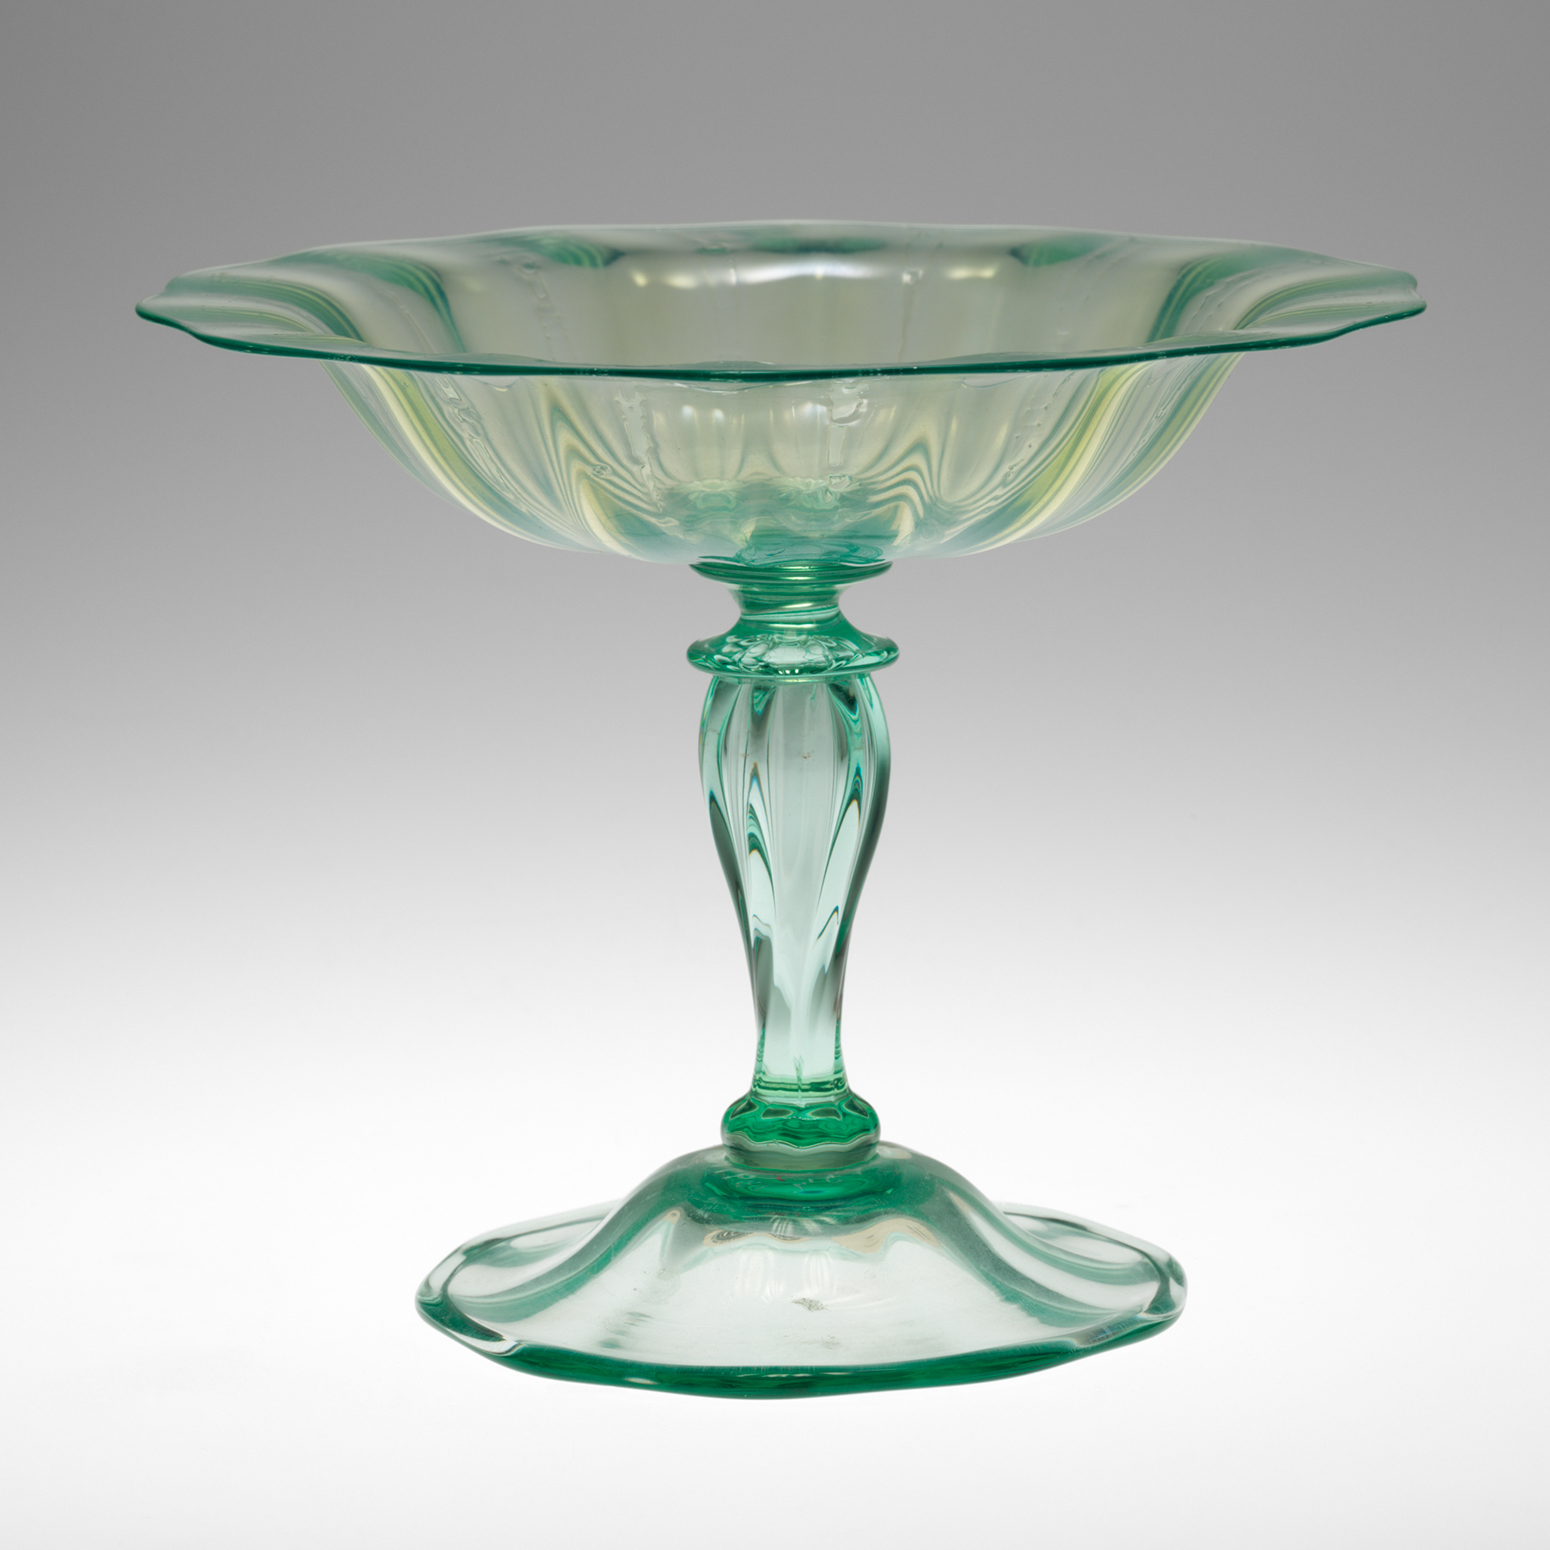 A light green glass dish with a wide rim and tall stem